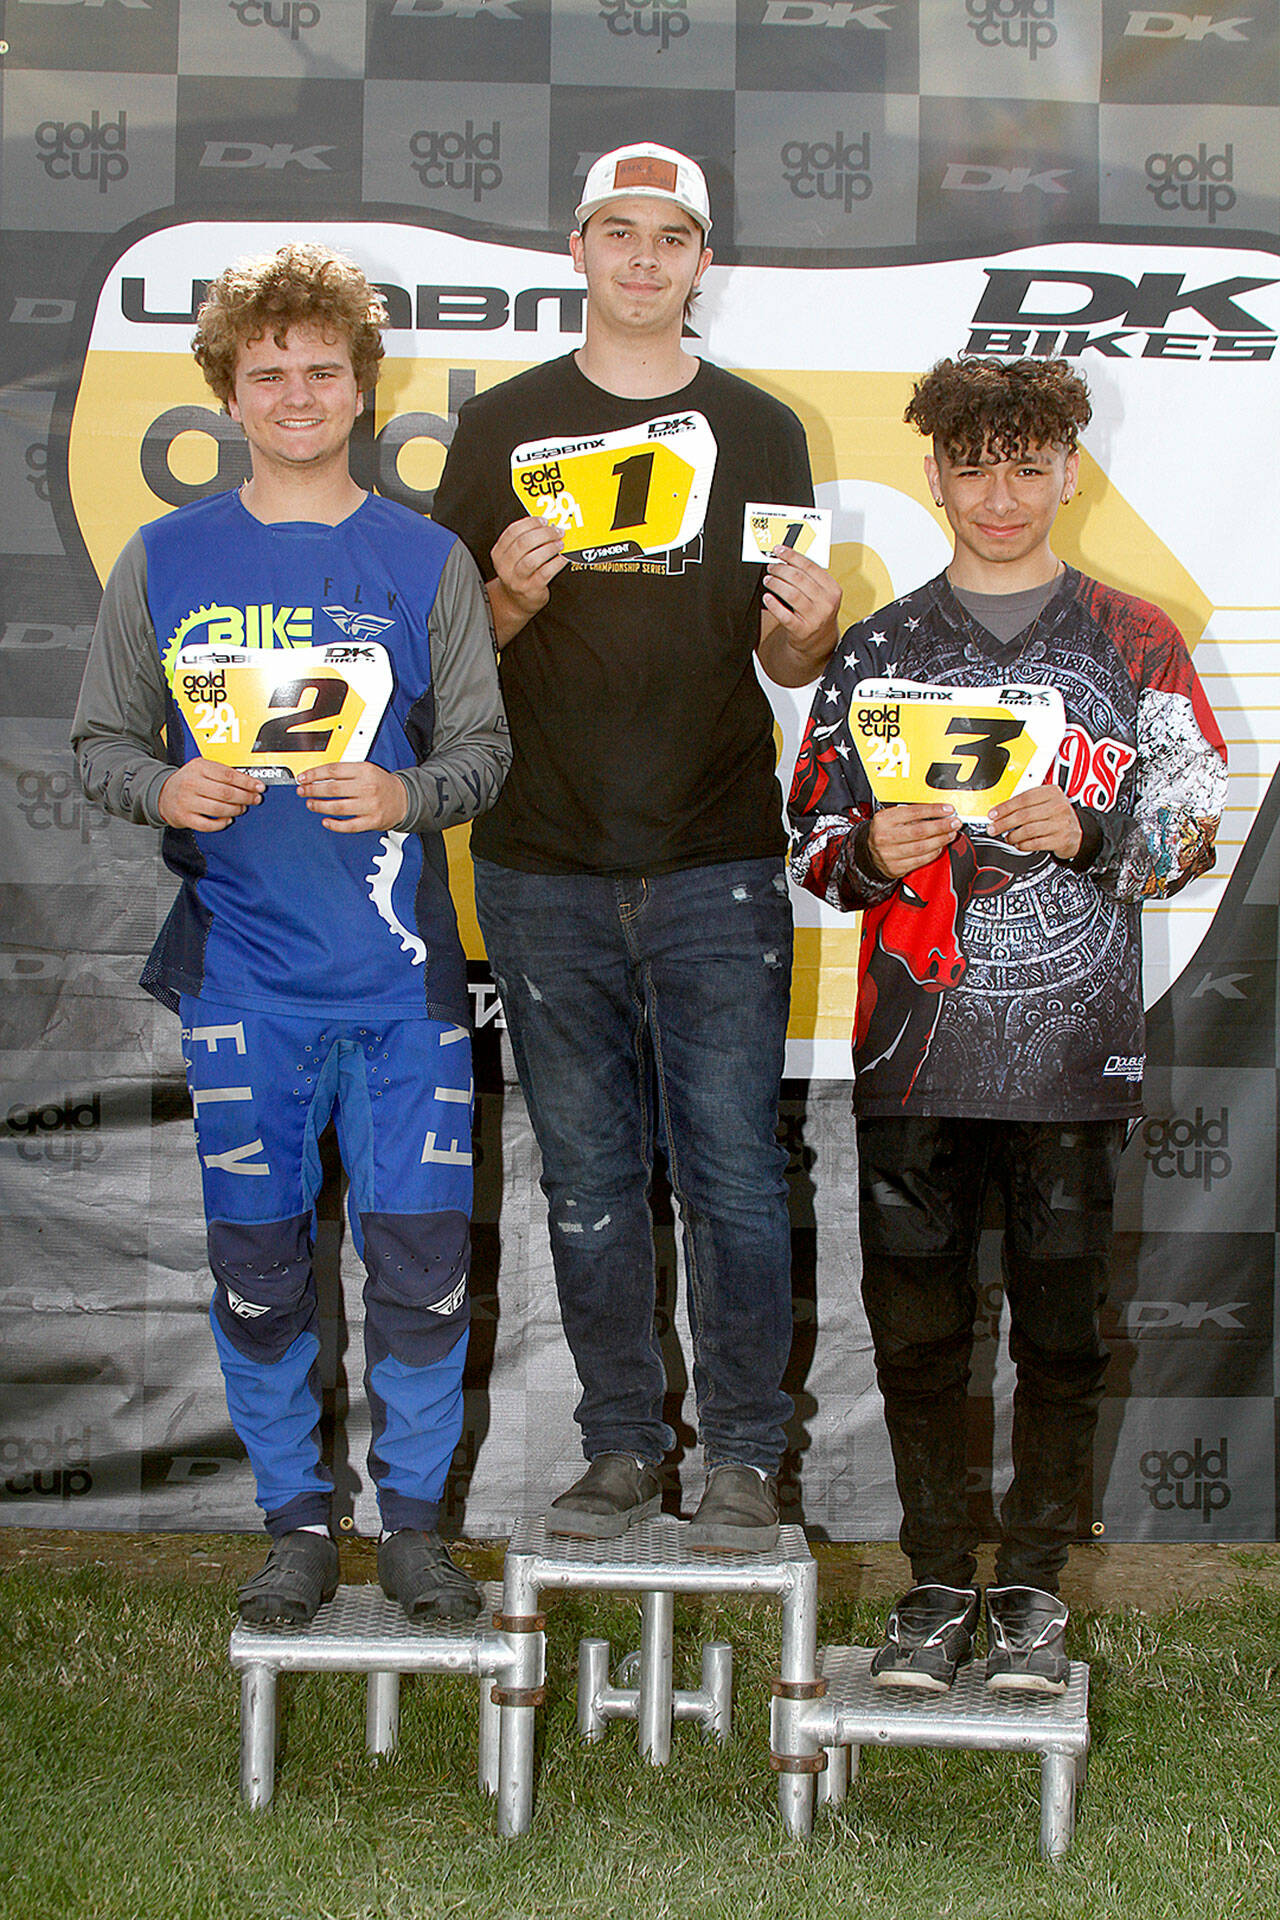 Chase Schweitzer of Port Hadlock, center, took the No. 1 plate at the Northwest Region BMX championships held in Richland Saturday and Sunday. At left is second-place finisher Kameron Johnson and at right is third-place finisher Erick Rios.